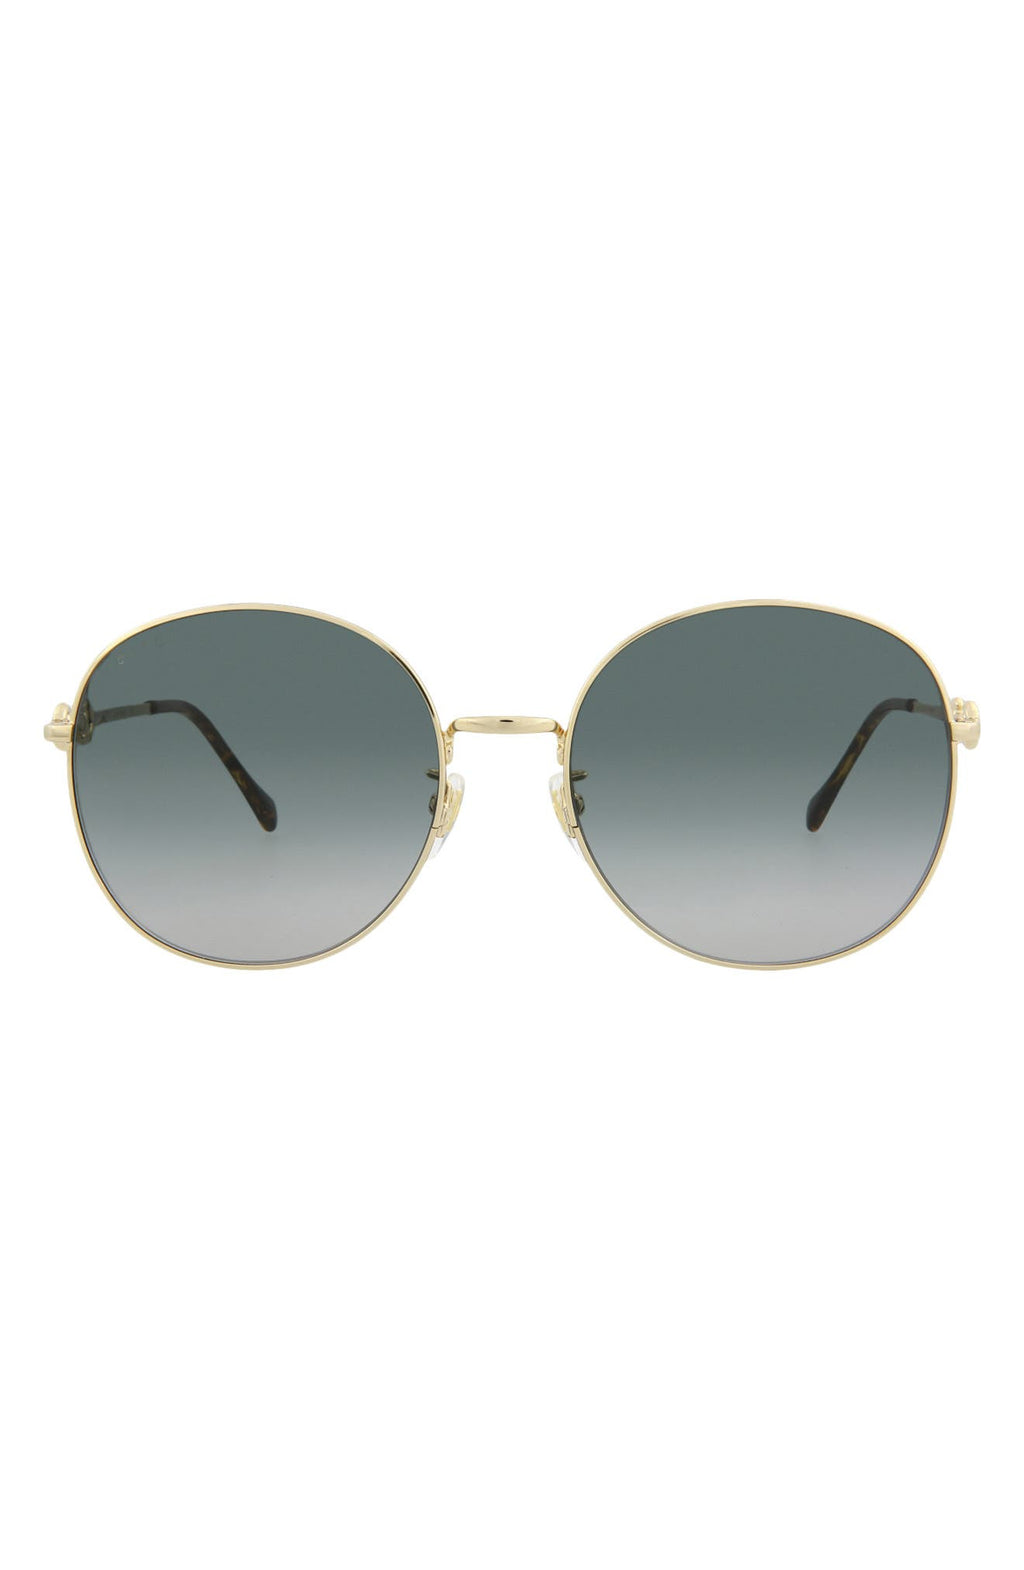 Gucci 59mm Round Sunglasses, Main, color, GOLD GOLD GREY